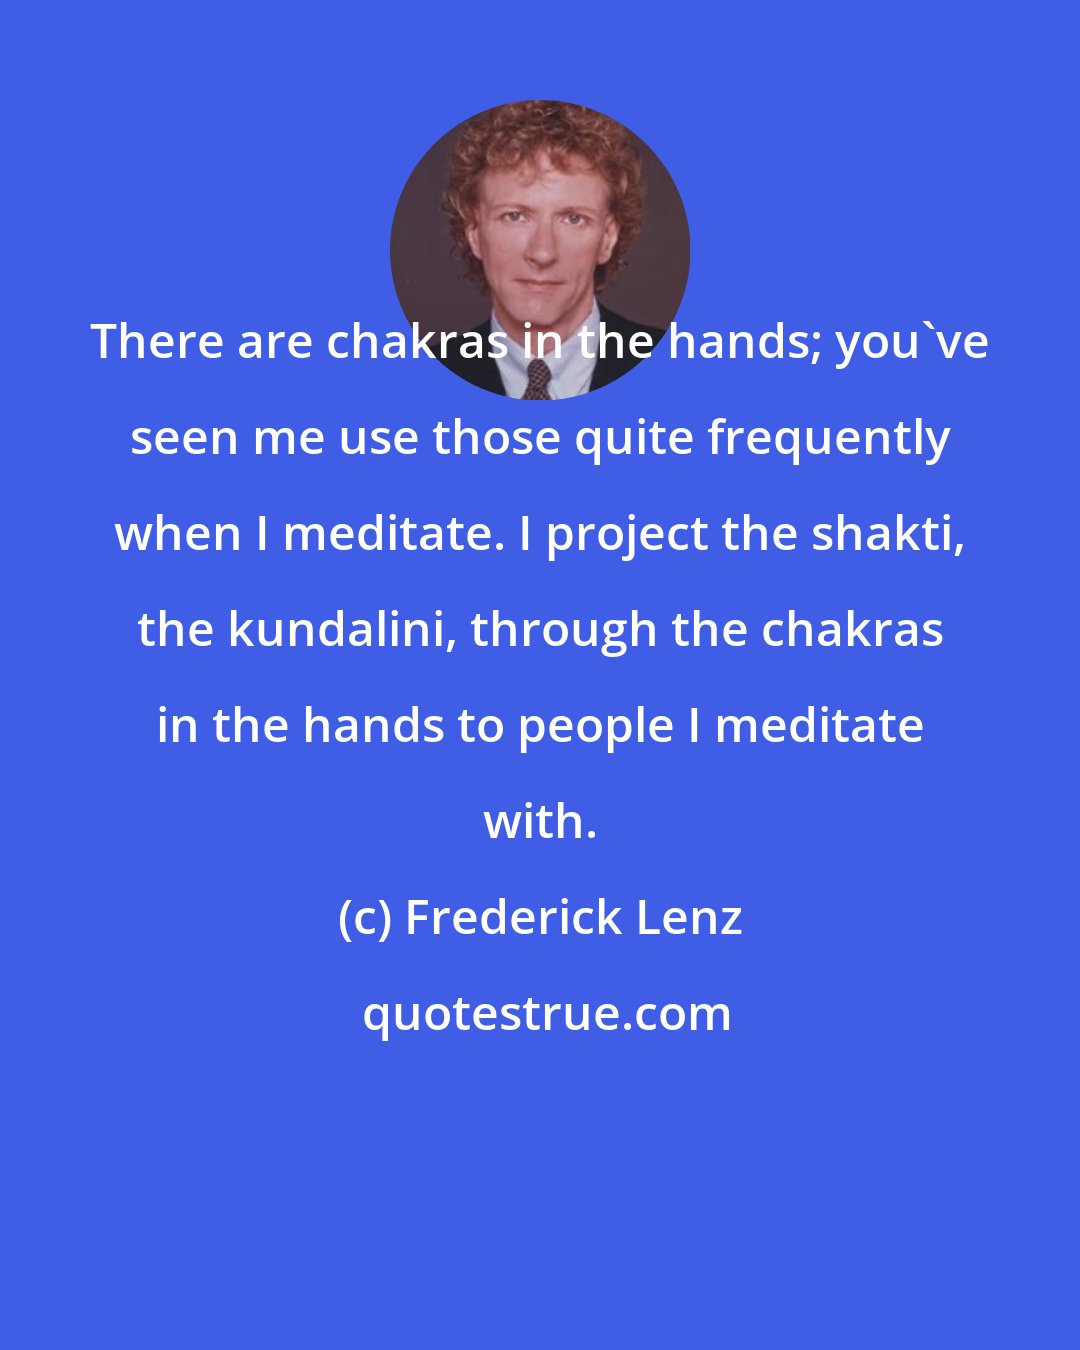 Frederick Lenz: There are chakras in the hands; you've seen me use those quite frequently when I meditate. I project the shakti, the kundalini, through the chakras in the hands to people I meditate with.